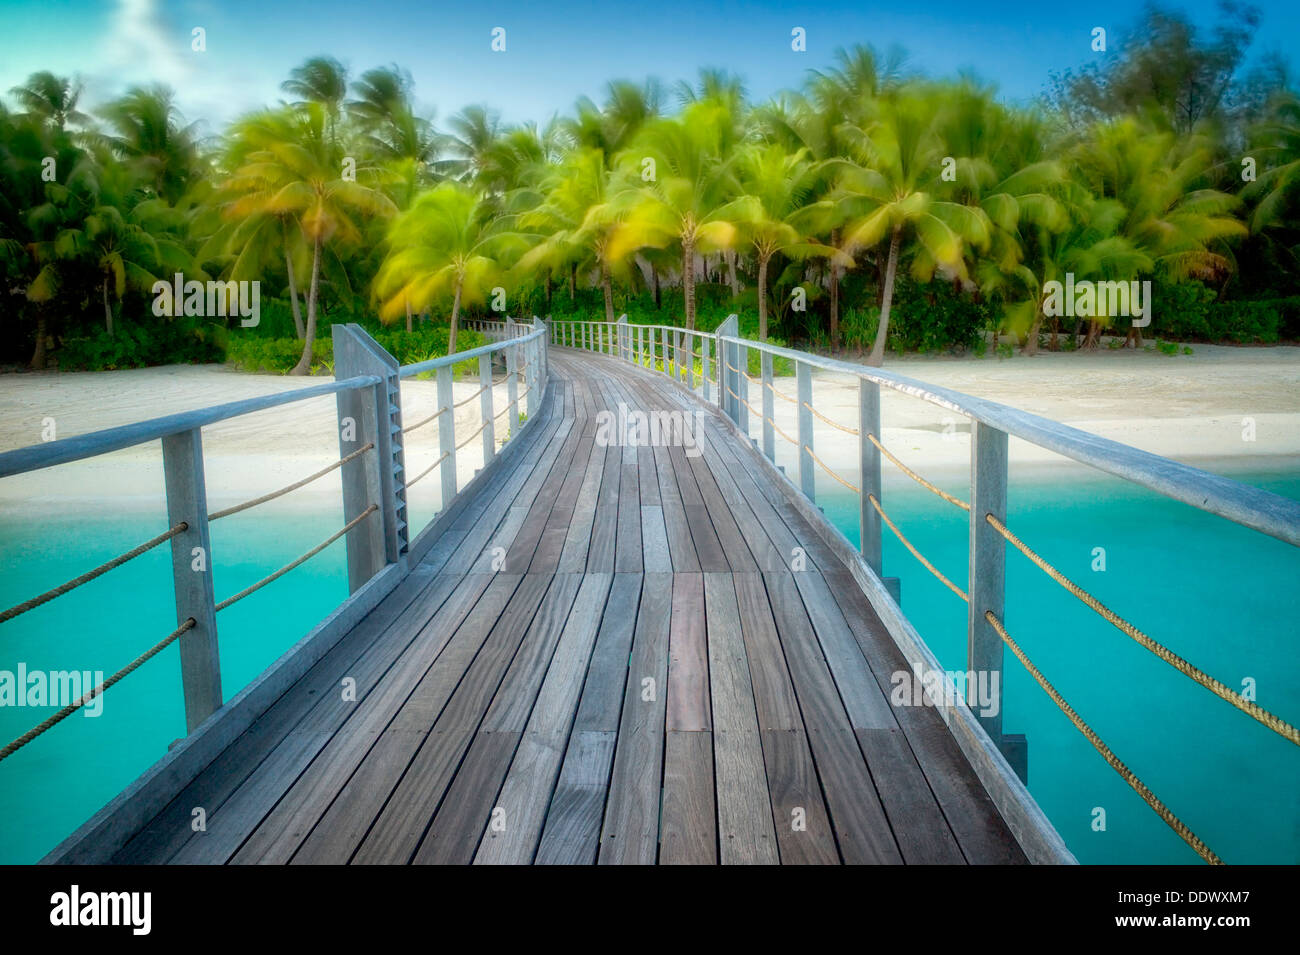 Boardwalk into palm trees blowing in the wind. French Polynesia Stock Photo